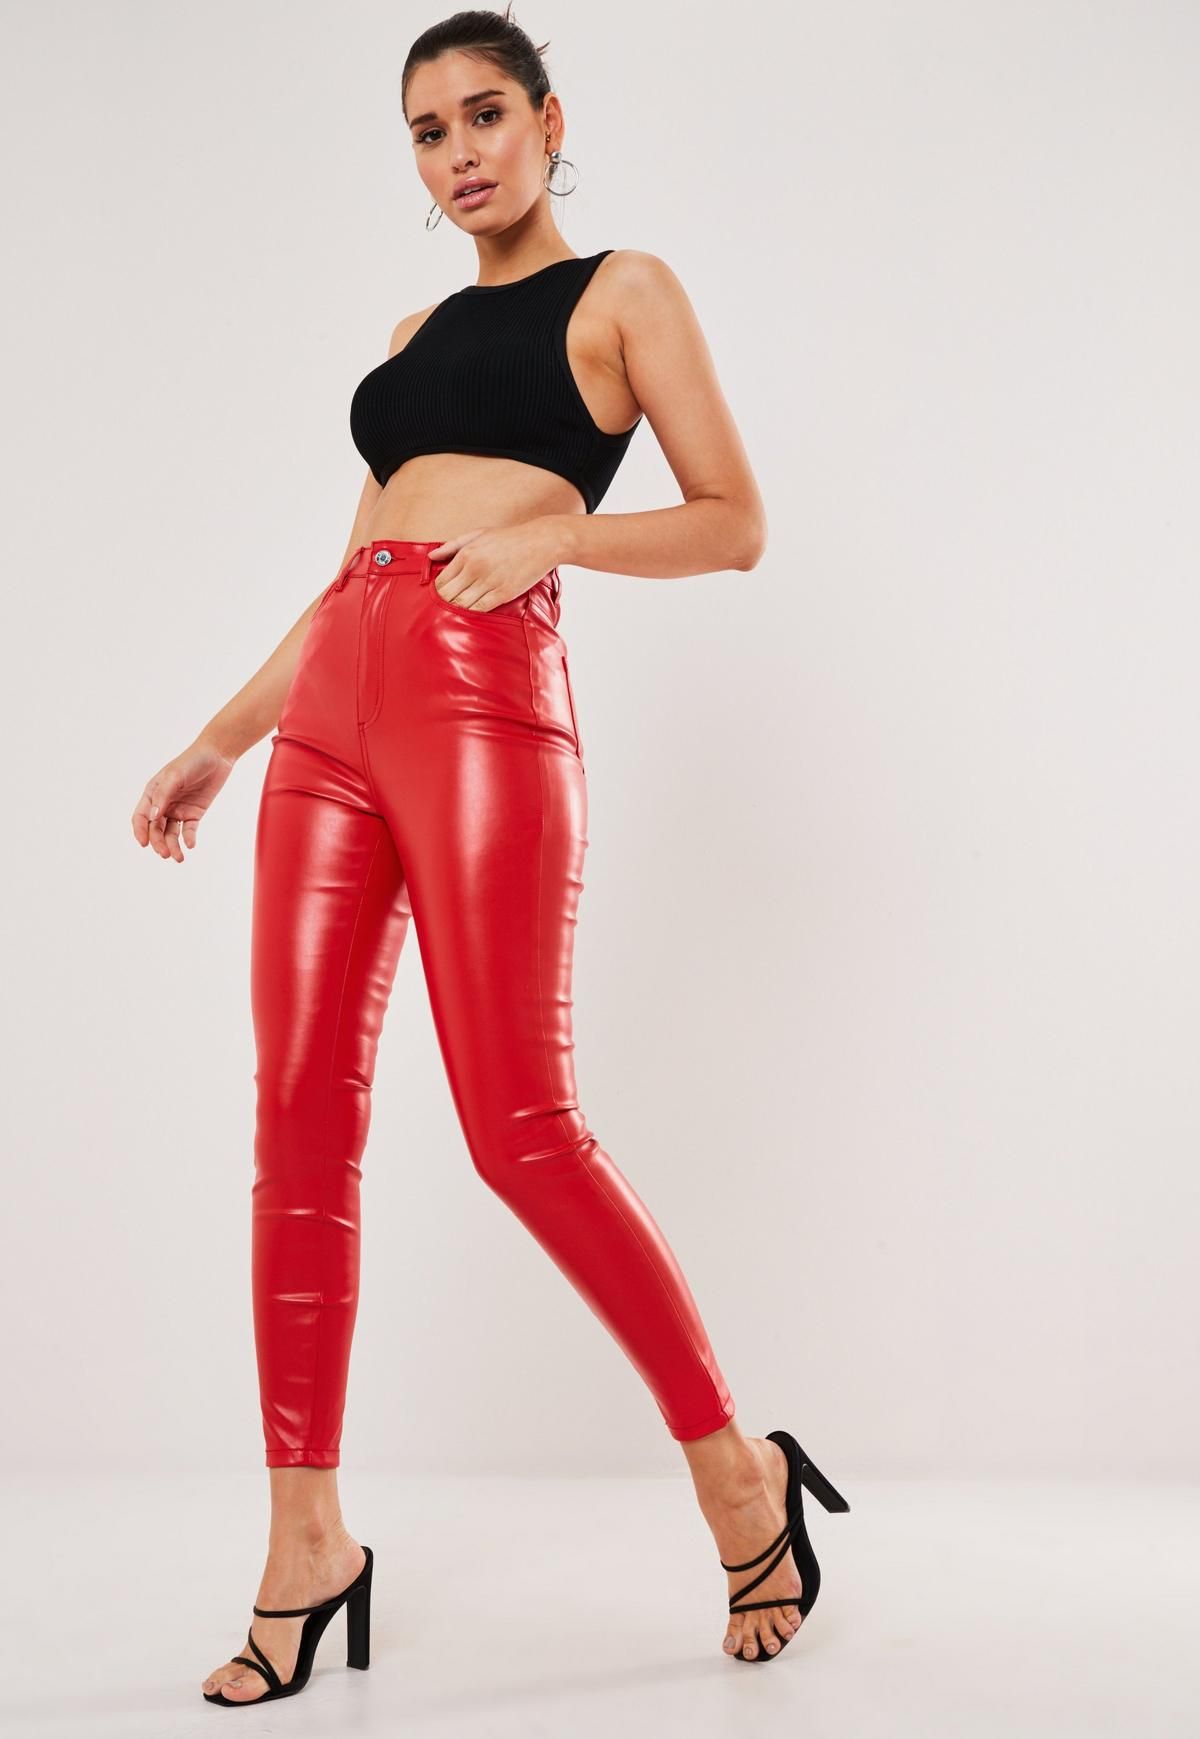 Red Pants Outfit Women's